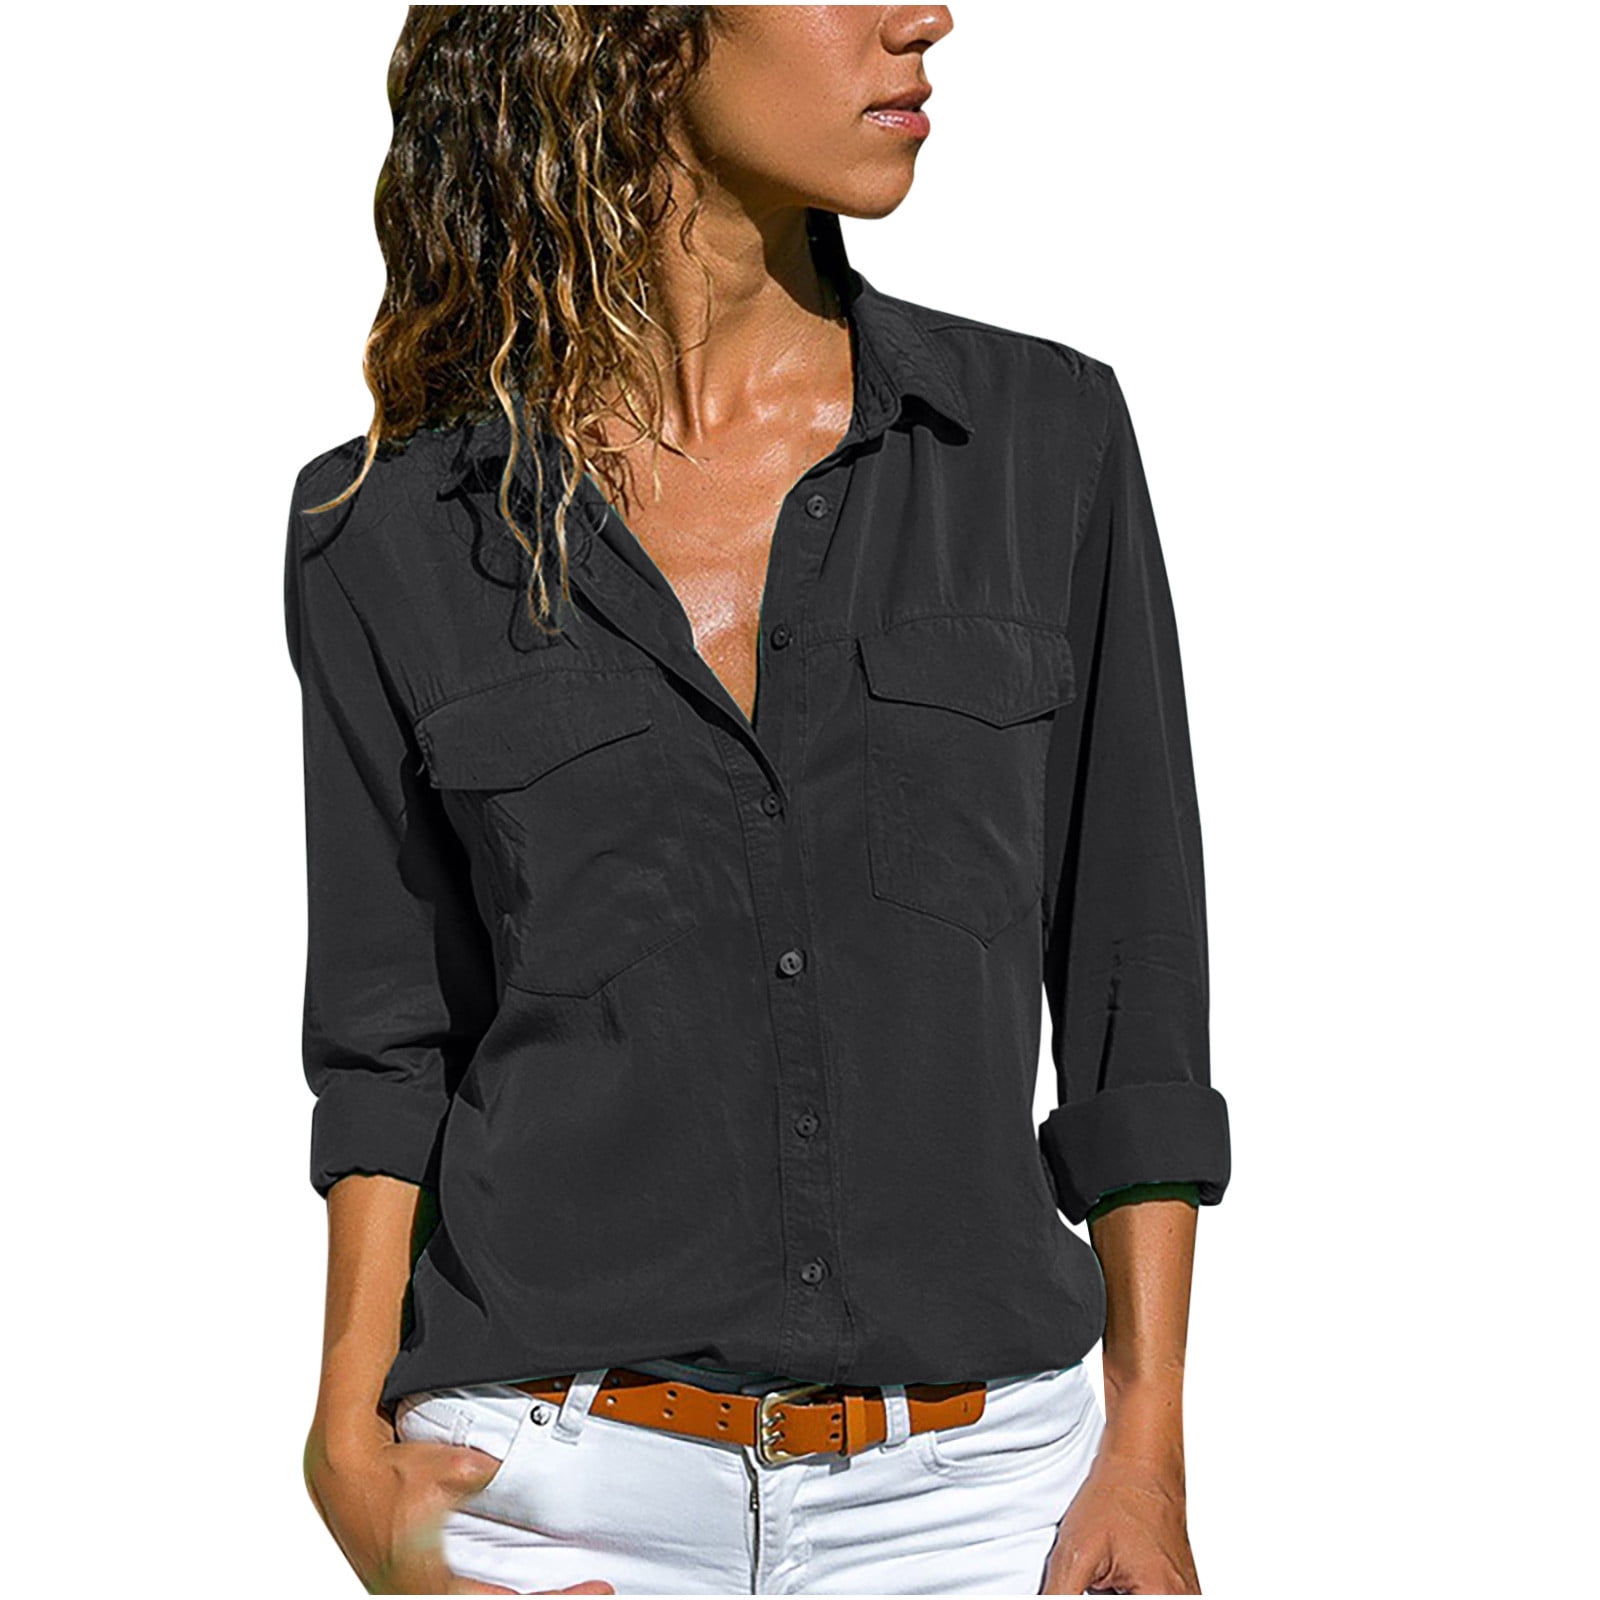  Long Sleeve Shirts for Women Fitted Polyester Blouses for Women  Long Sleeve Shirts for Women Dressy Women's Tunic Tops Long Sleeve Tops  Women Pack 1.00 Dollar Items Men Stuff Under Ten